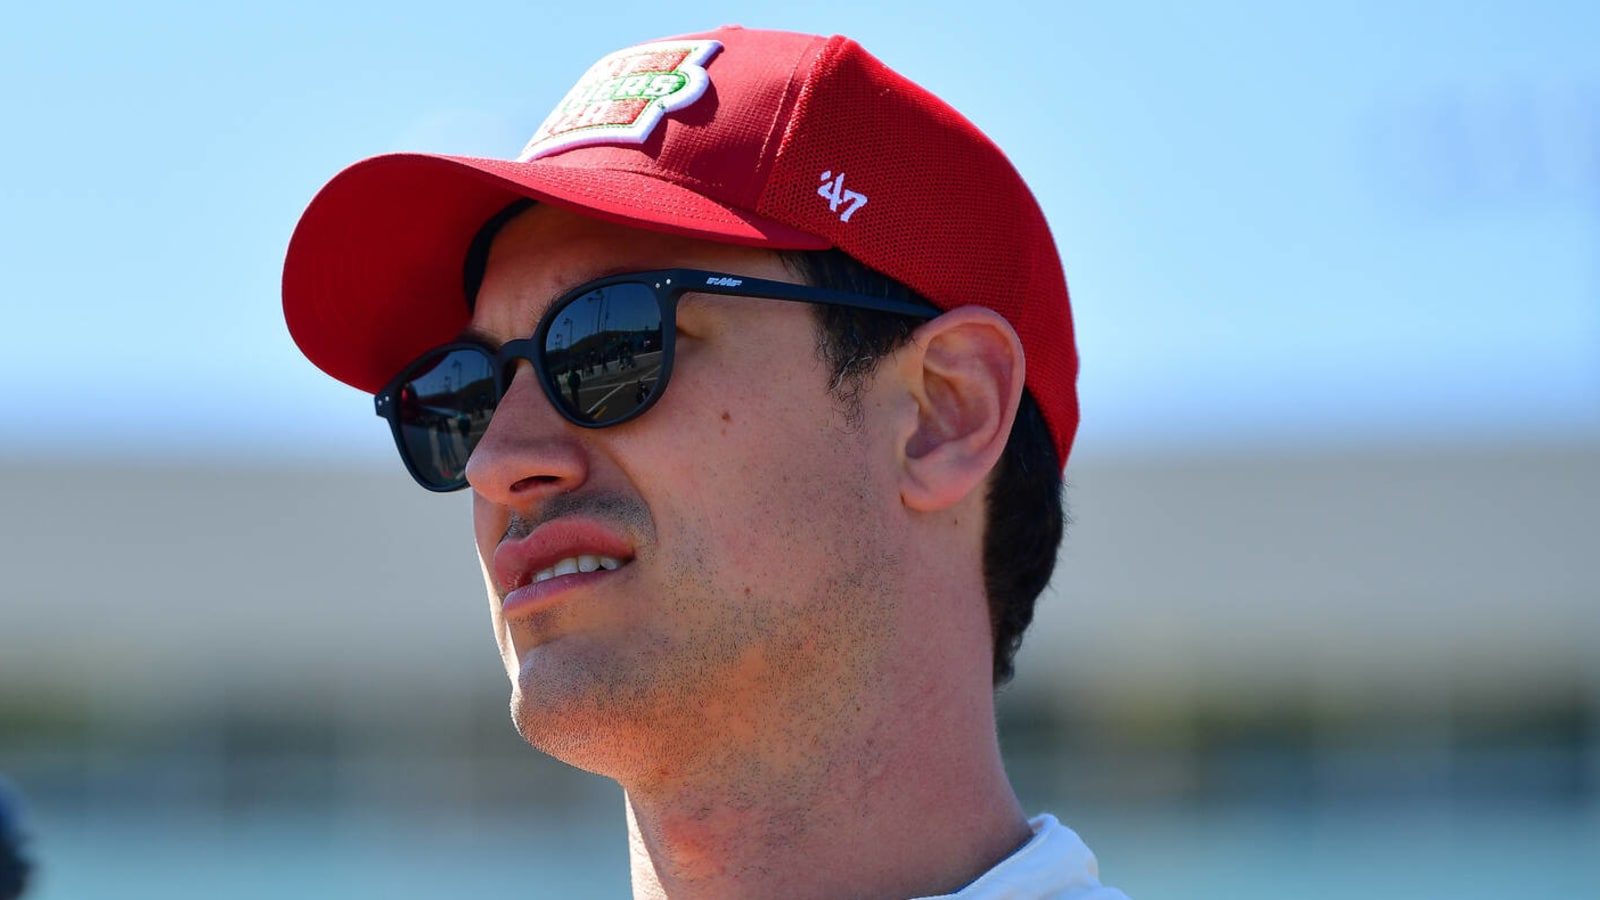 Will Joey Logano pull page out of Kevin Harvick book and become a broadcaster after retirement?